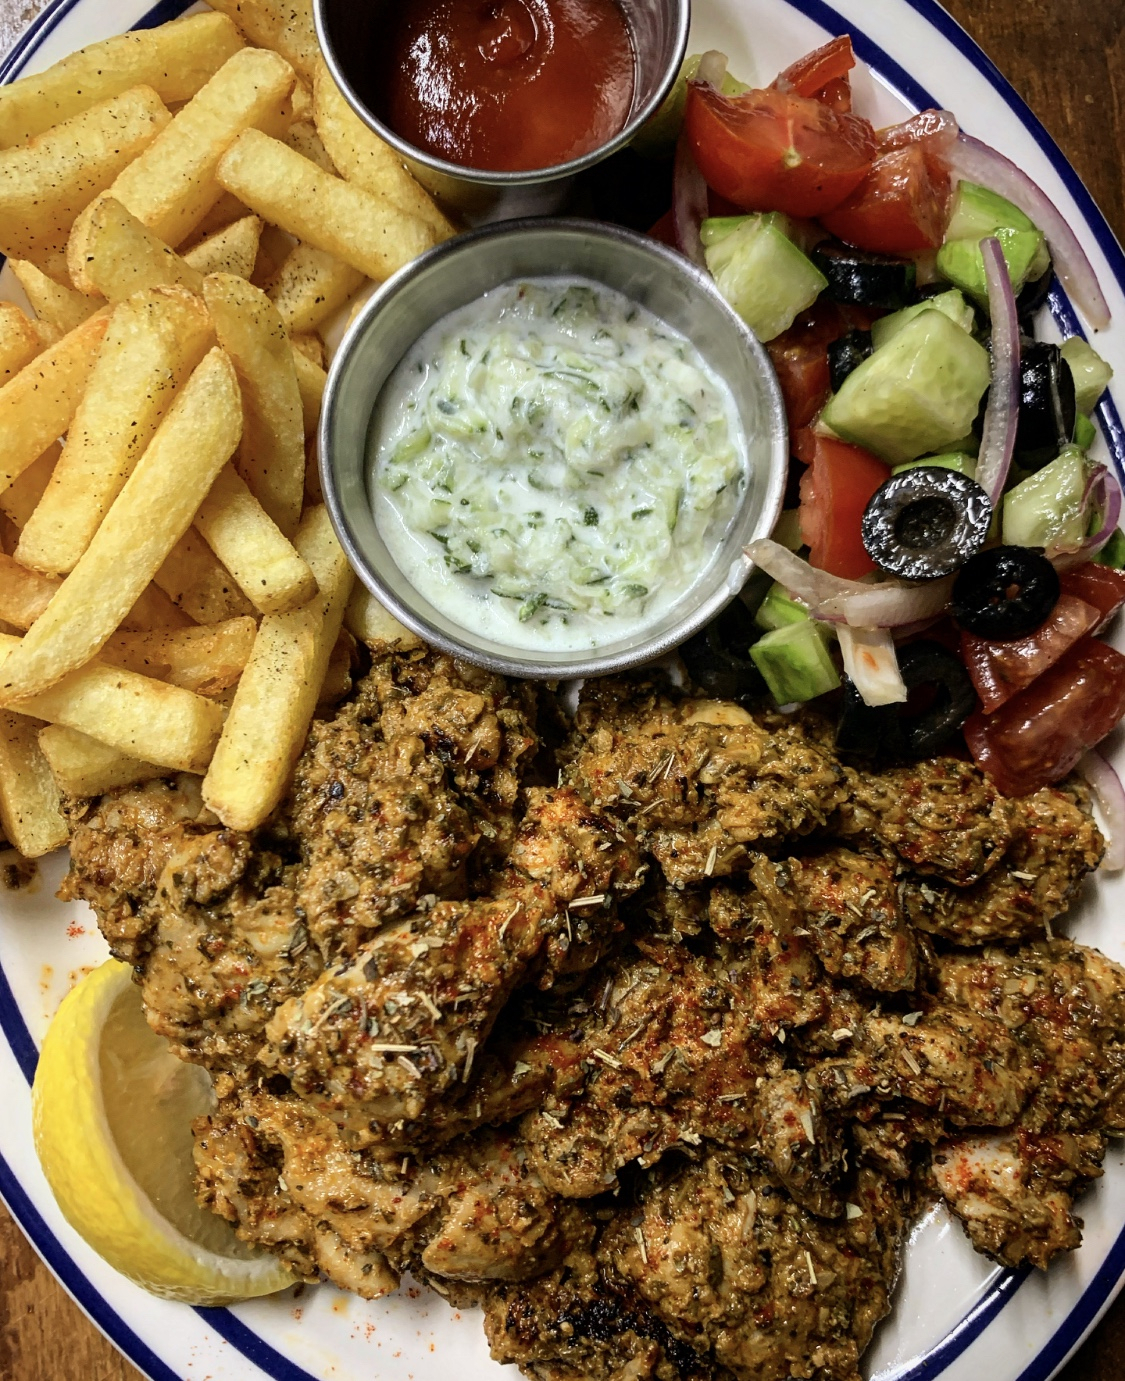 Kantina's Greek chicken, with a choice of bread or fries on the side (Kantina)